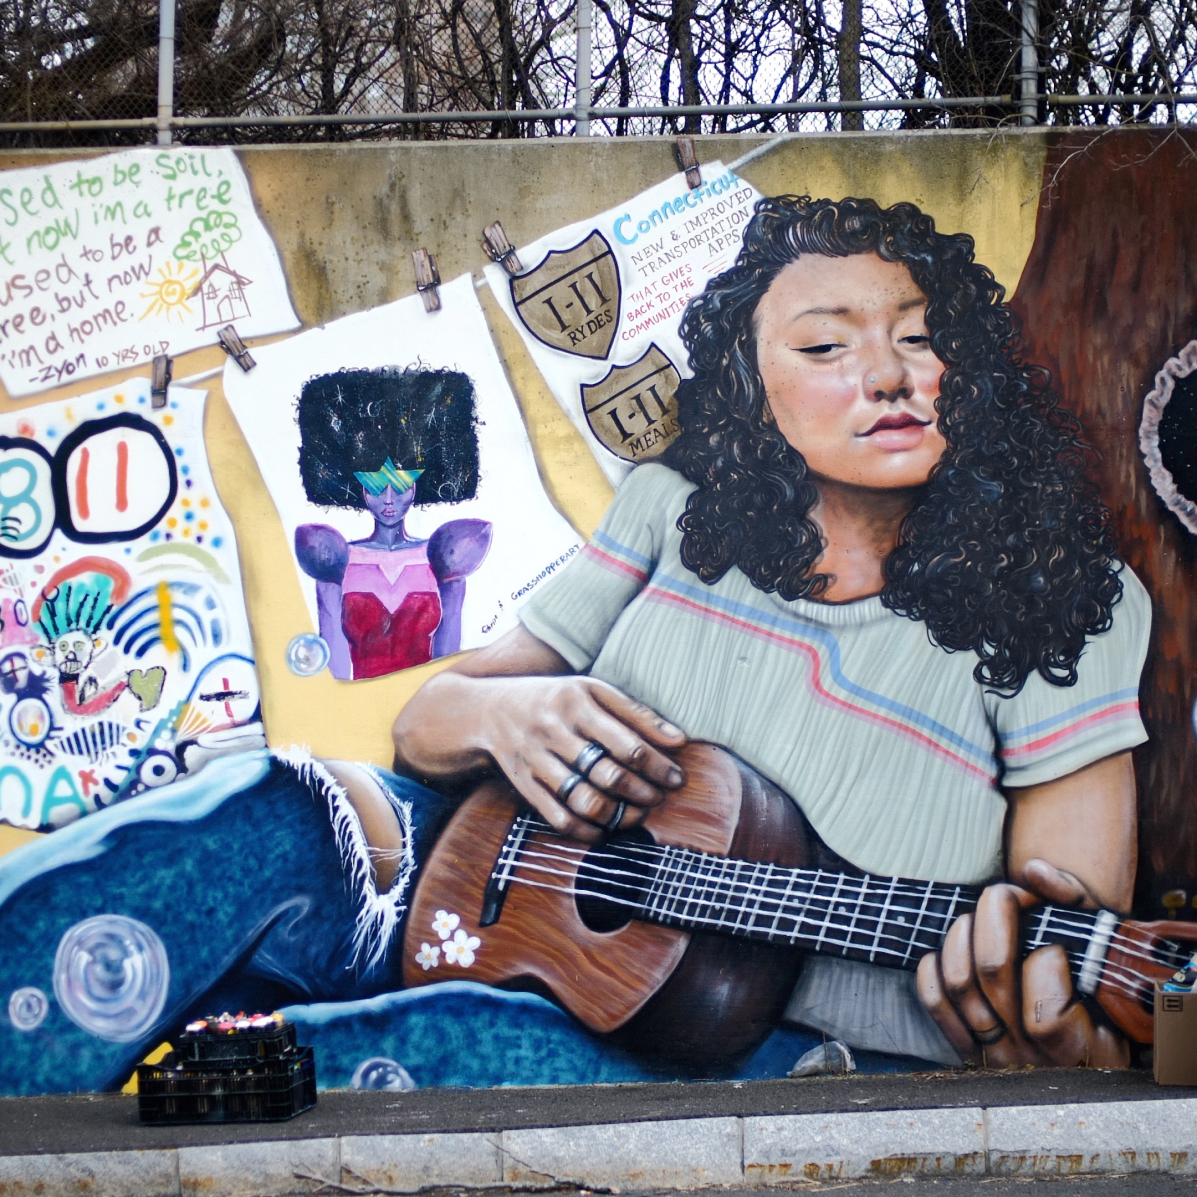 Part of the mural "Star Gazing." A woman with long curly hair is playing a ukulele in this section.